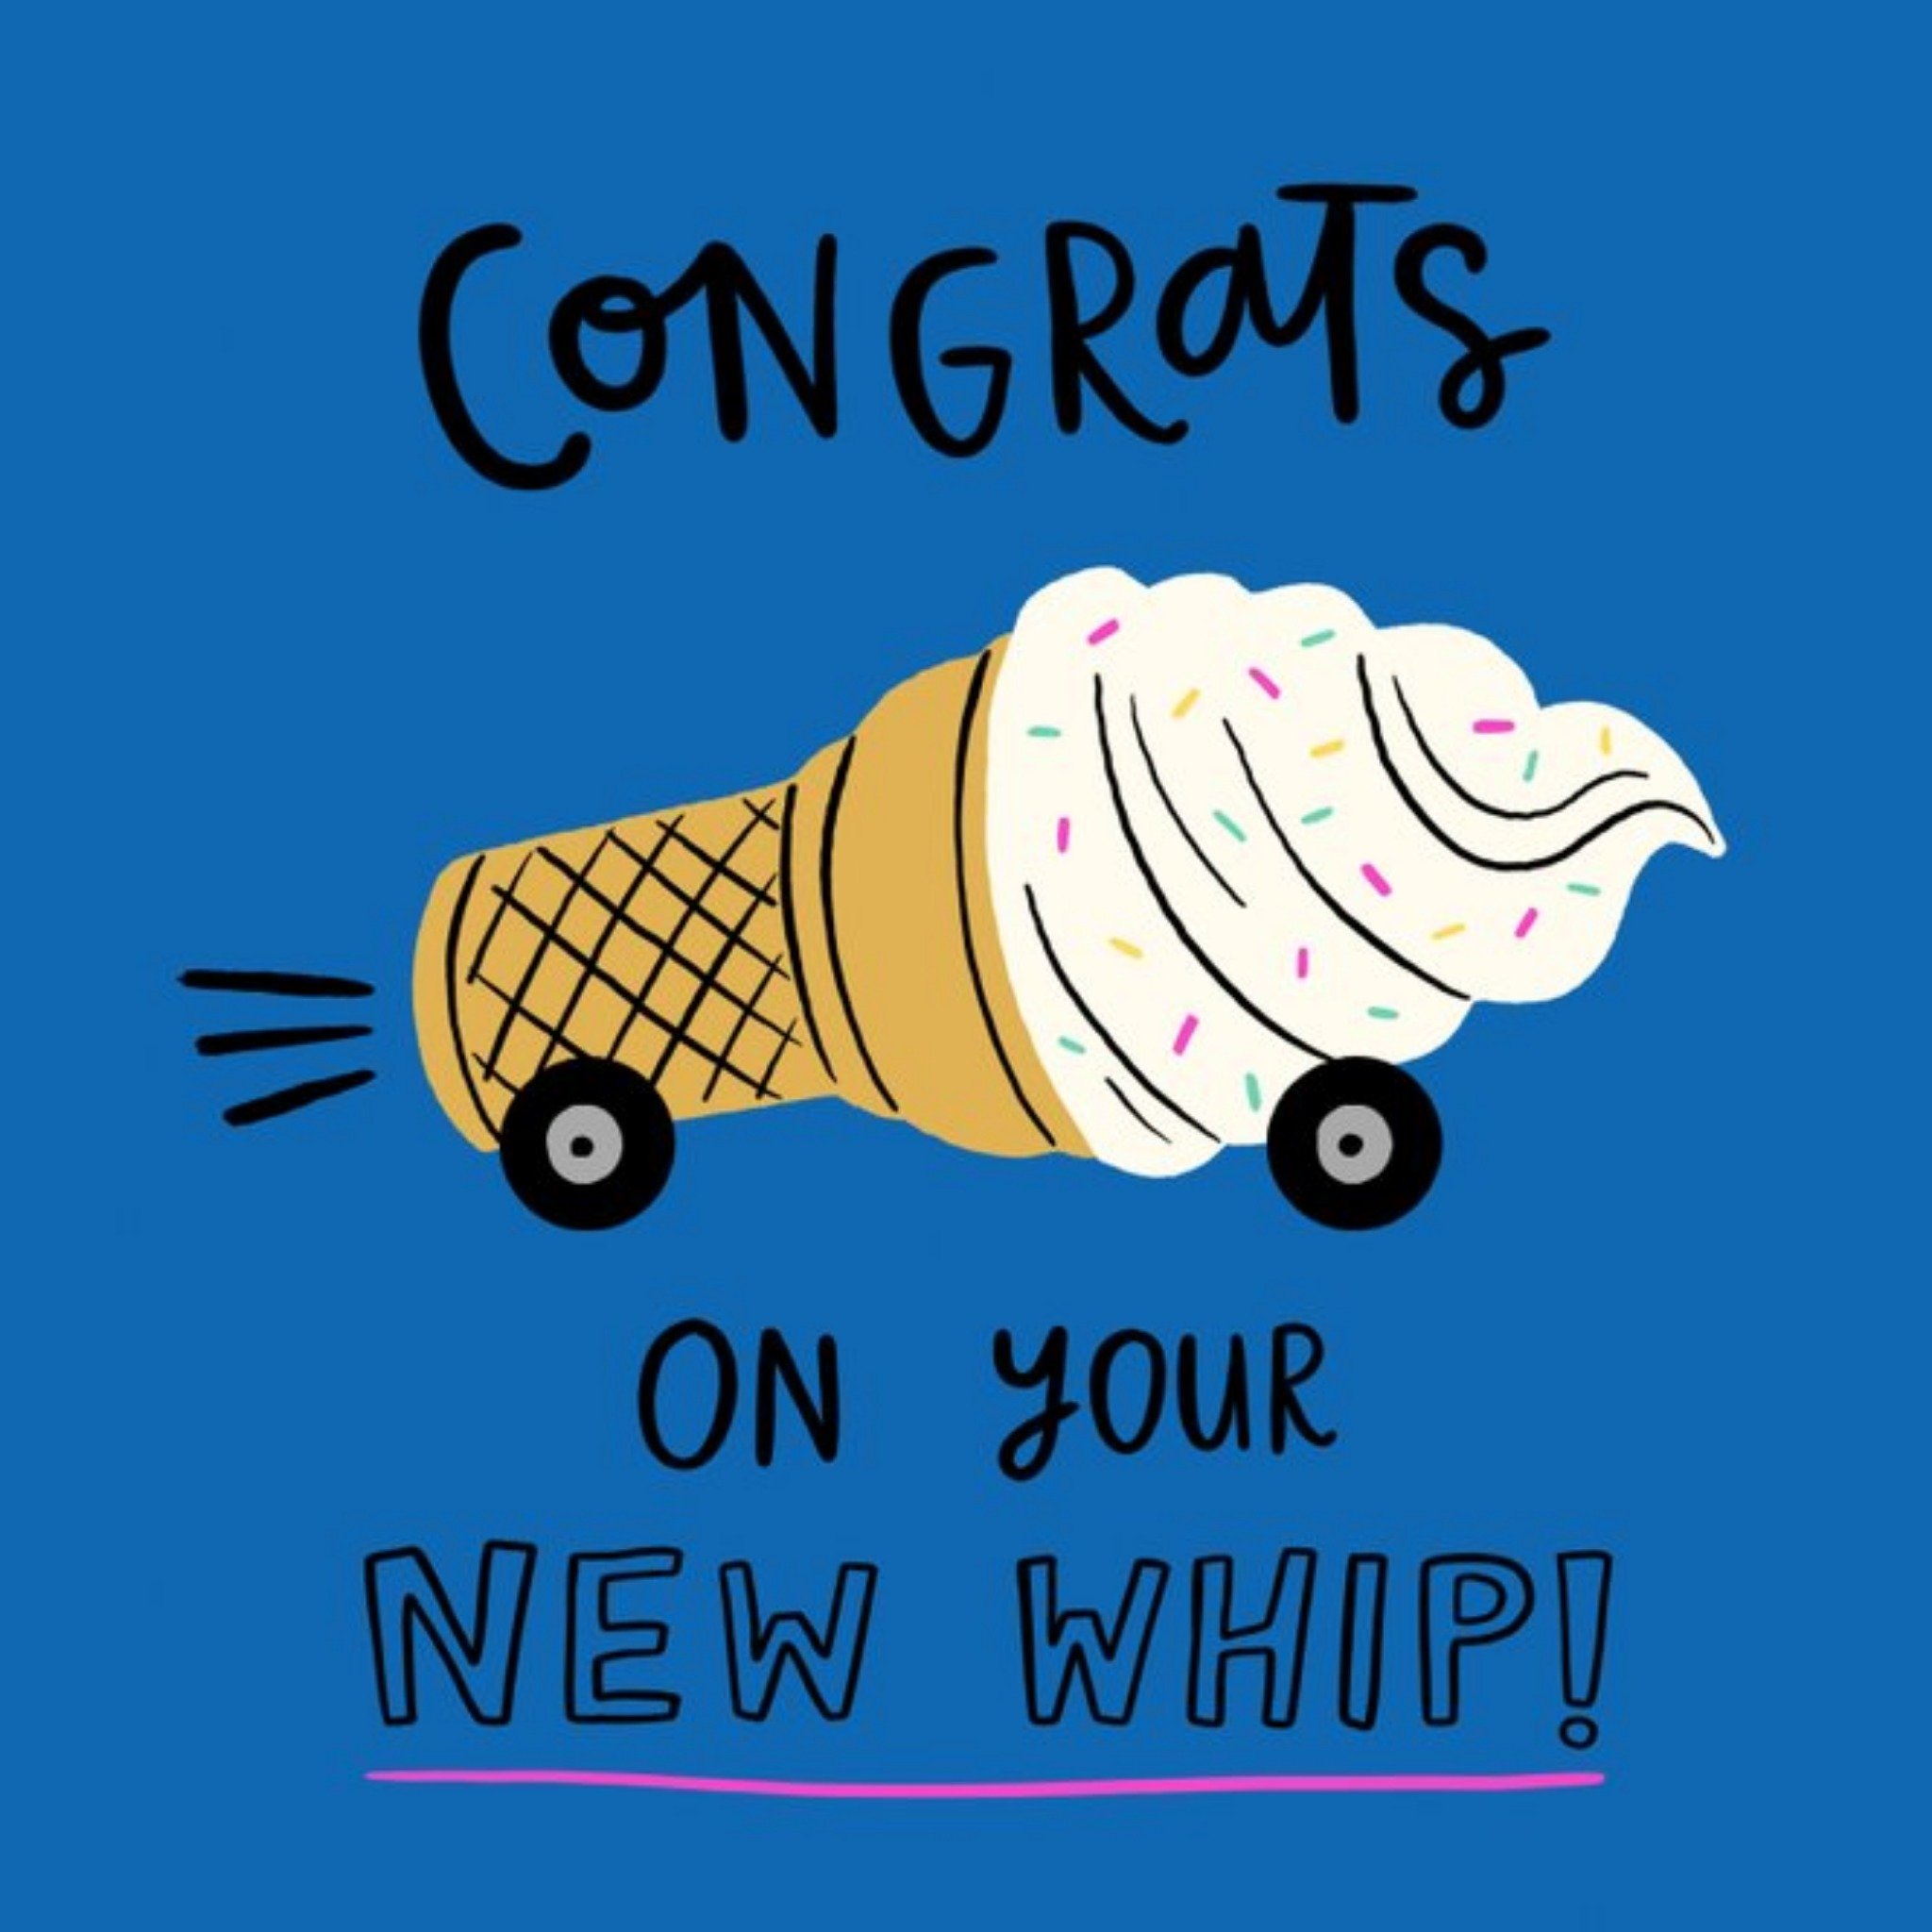 Moonpig Kapow Illustrated Ice Cream Cone On Wheels Congrats On Your New Whip Card, Large